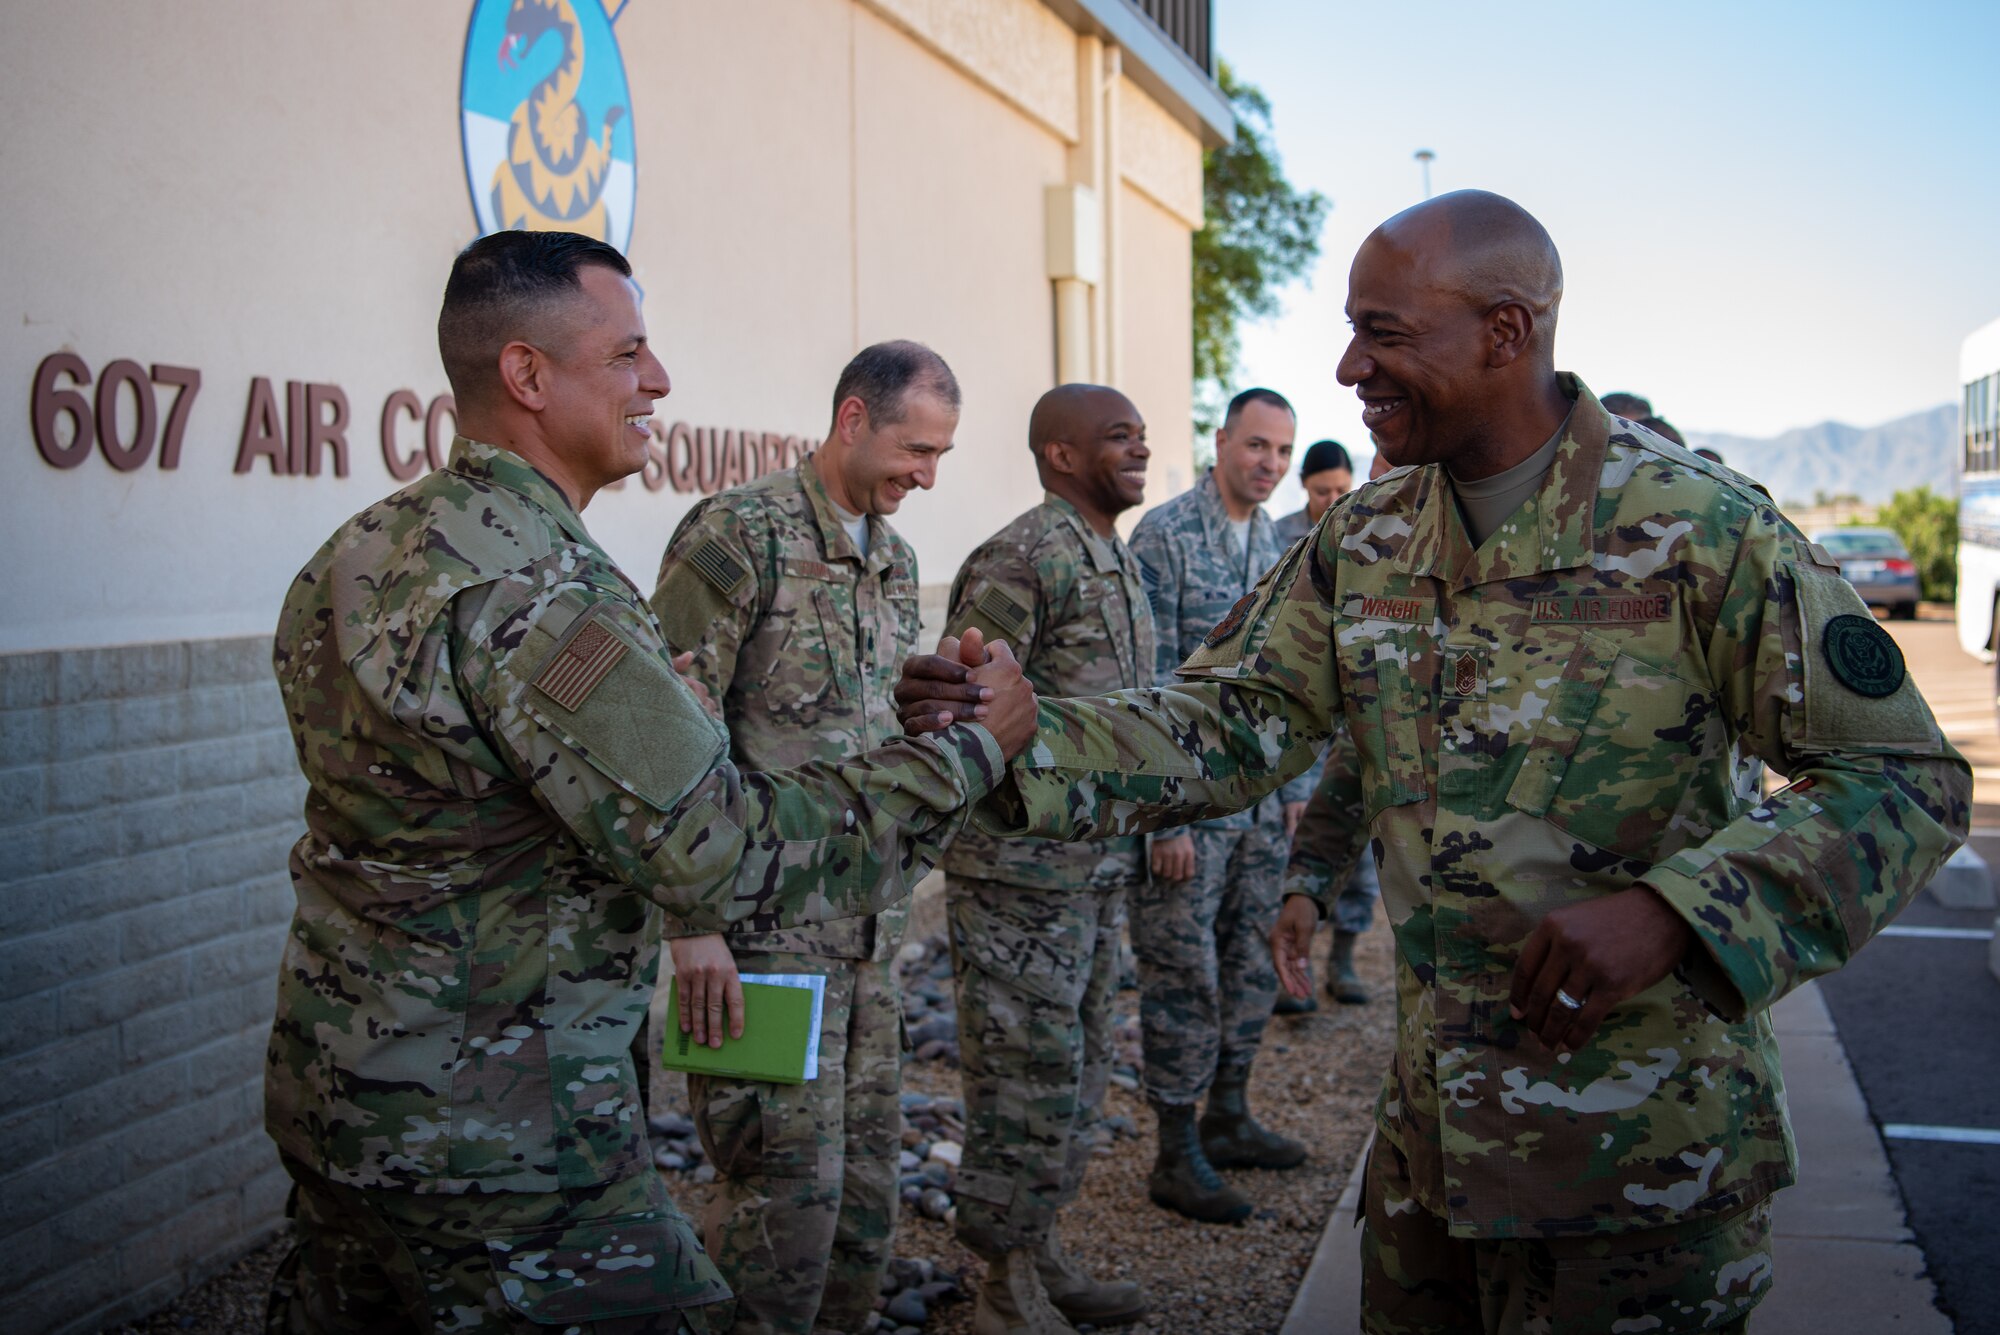 Members from the 607th Air Control Squadron greet Chief Master Sgt. of the Air Force Kaleth O. Wright, Oct. 22, 2018 at Luke Air Force Base, Ariz.